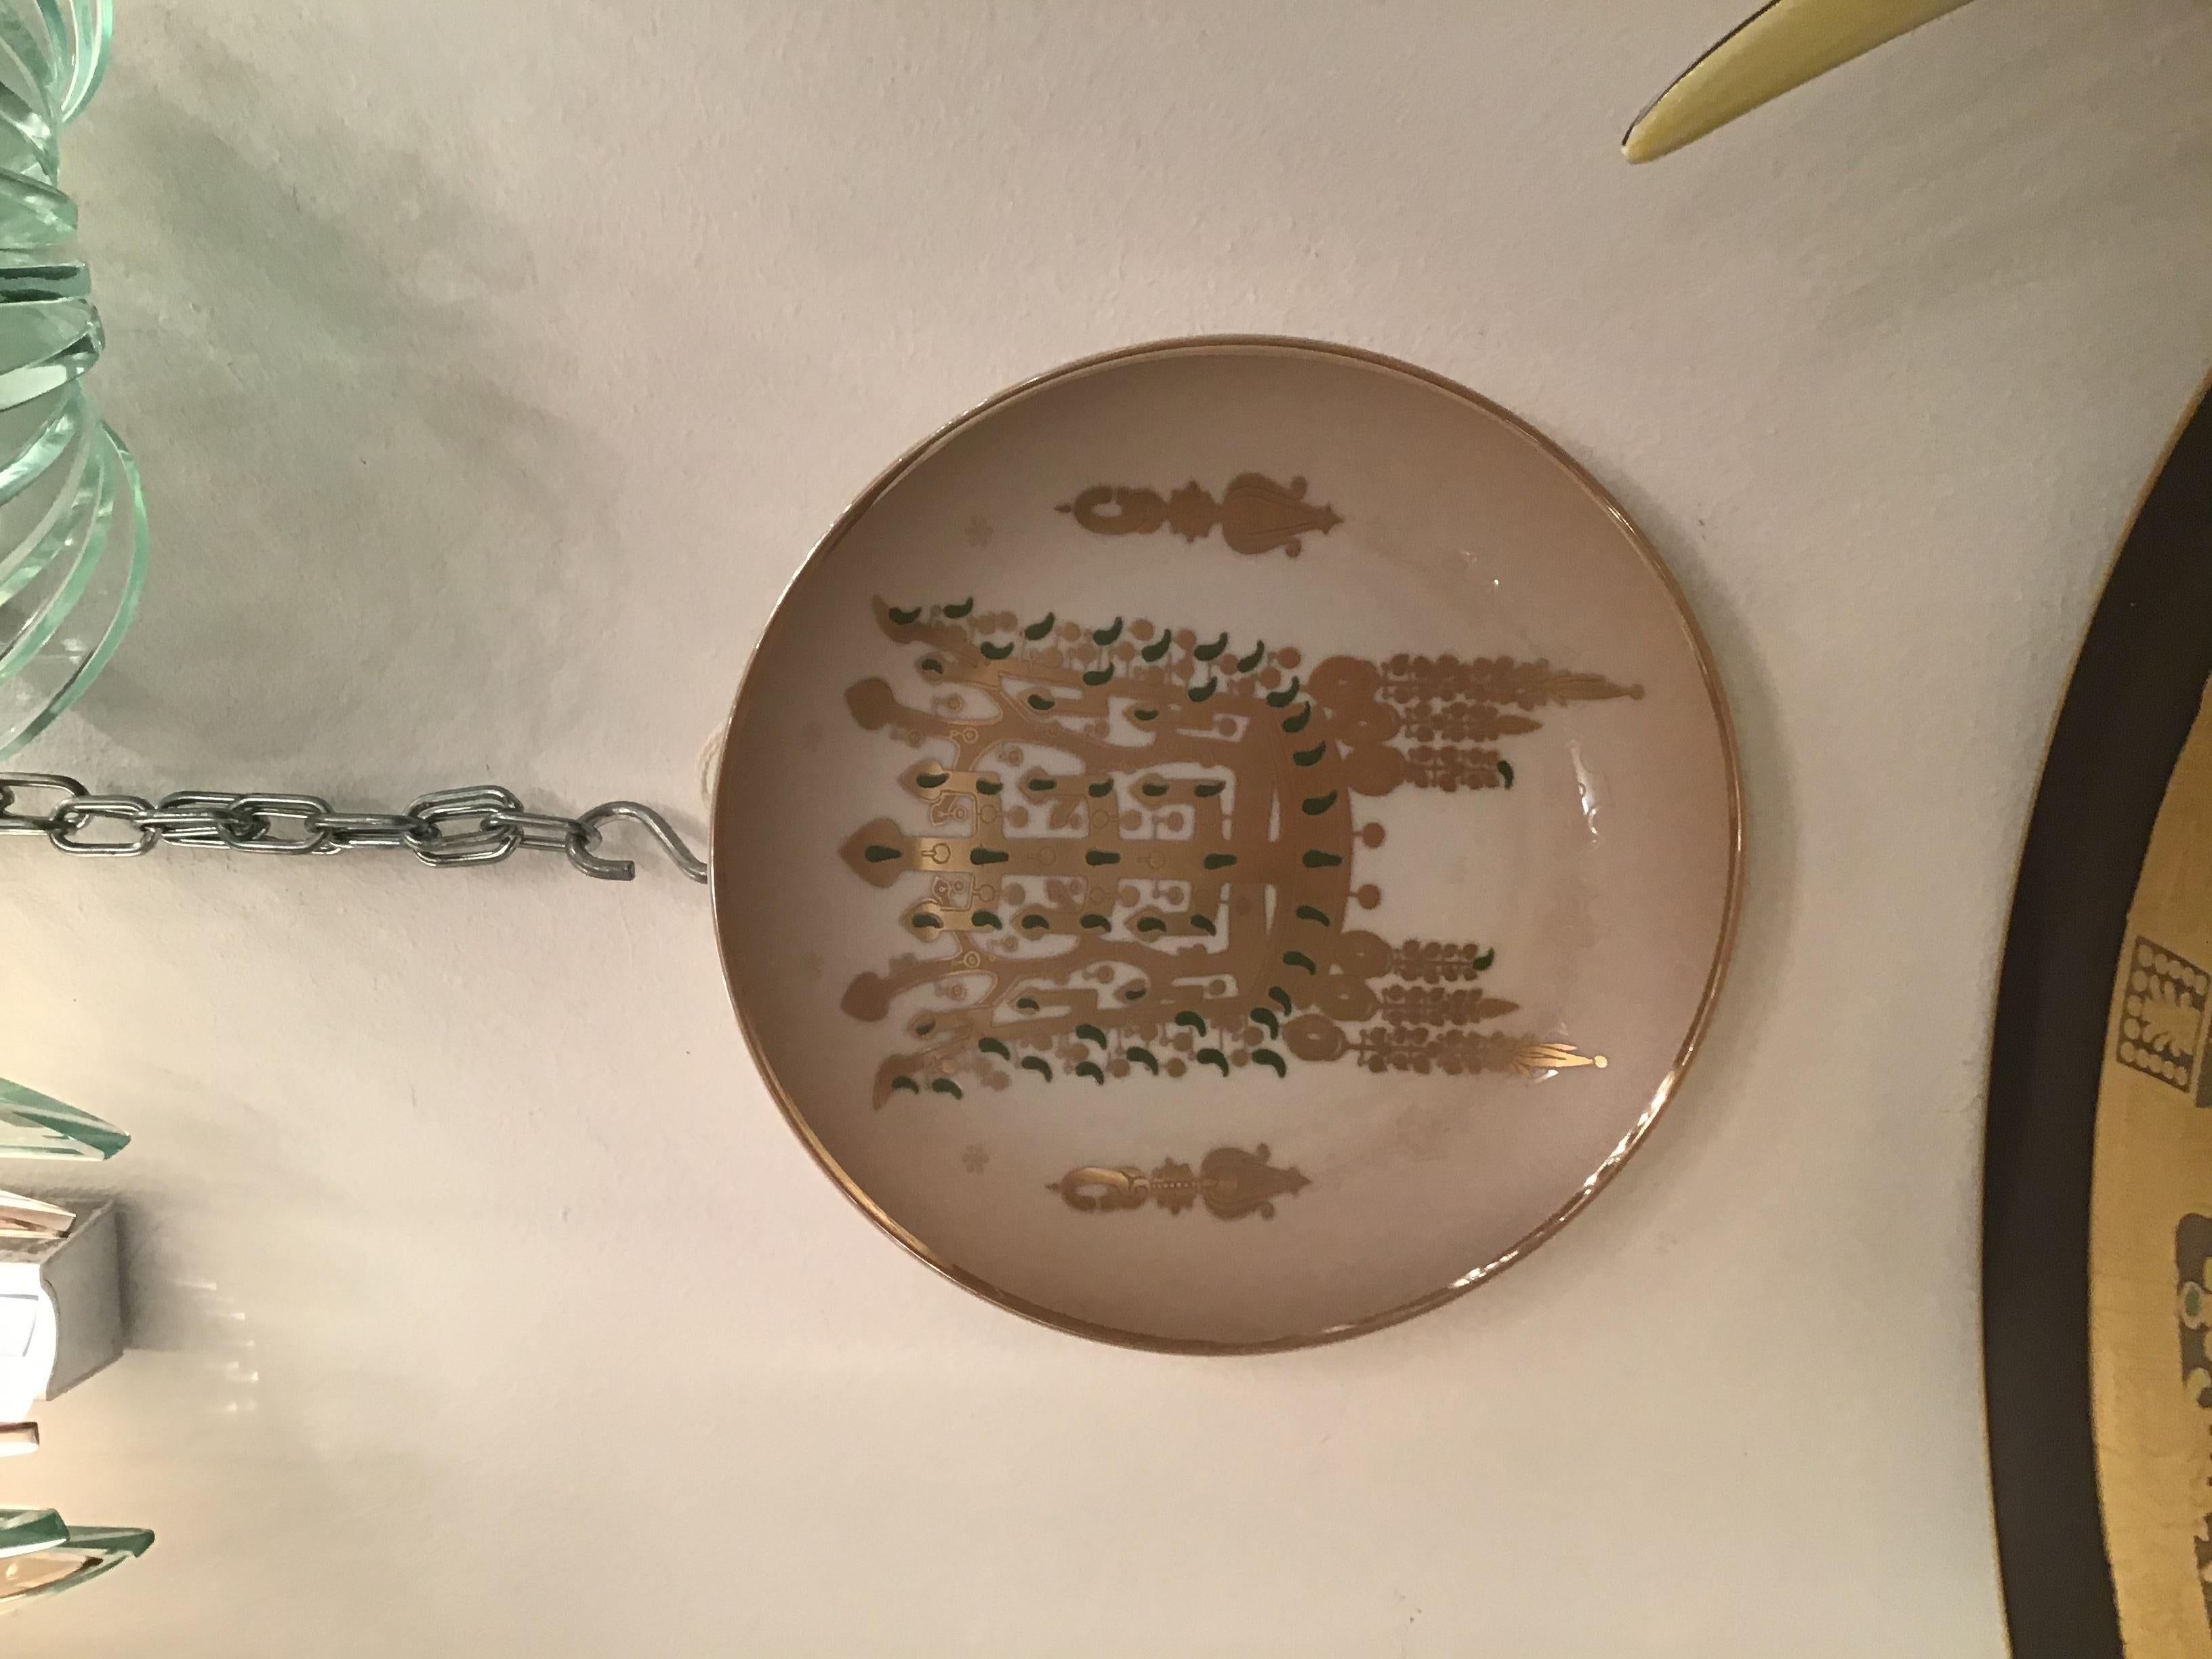 Morbelli Porcelain “Dinastia Silla” Wall Plates Worked with Pure Gold 1960 Italy For Sale 11